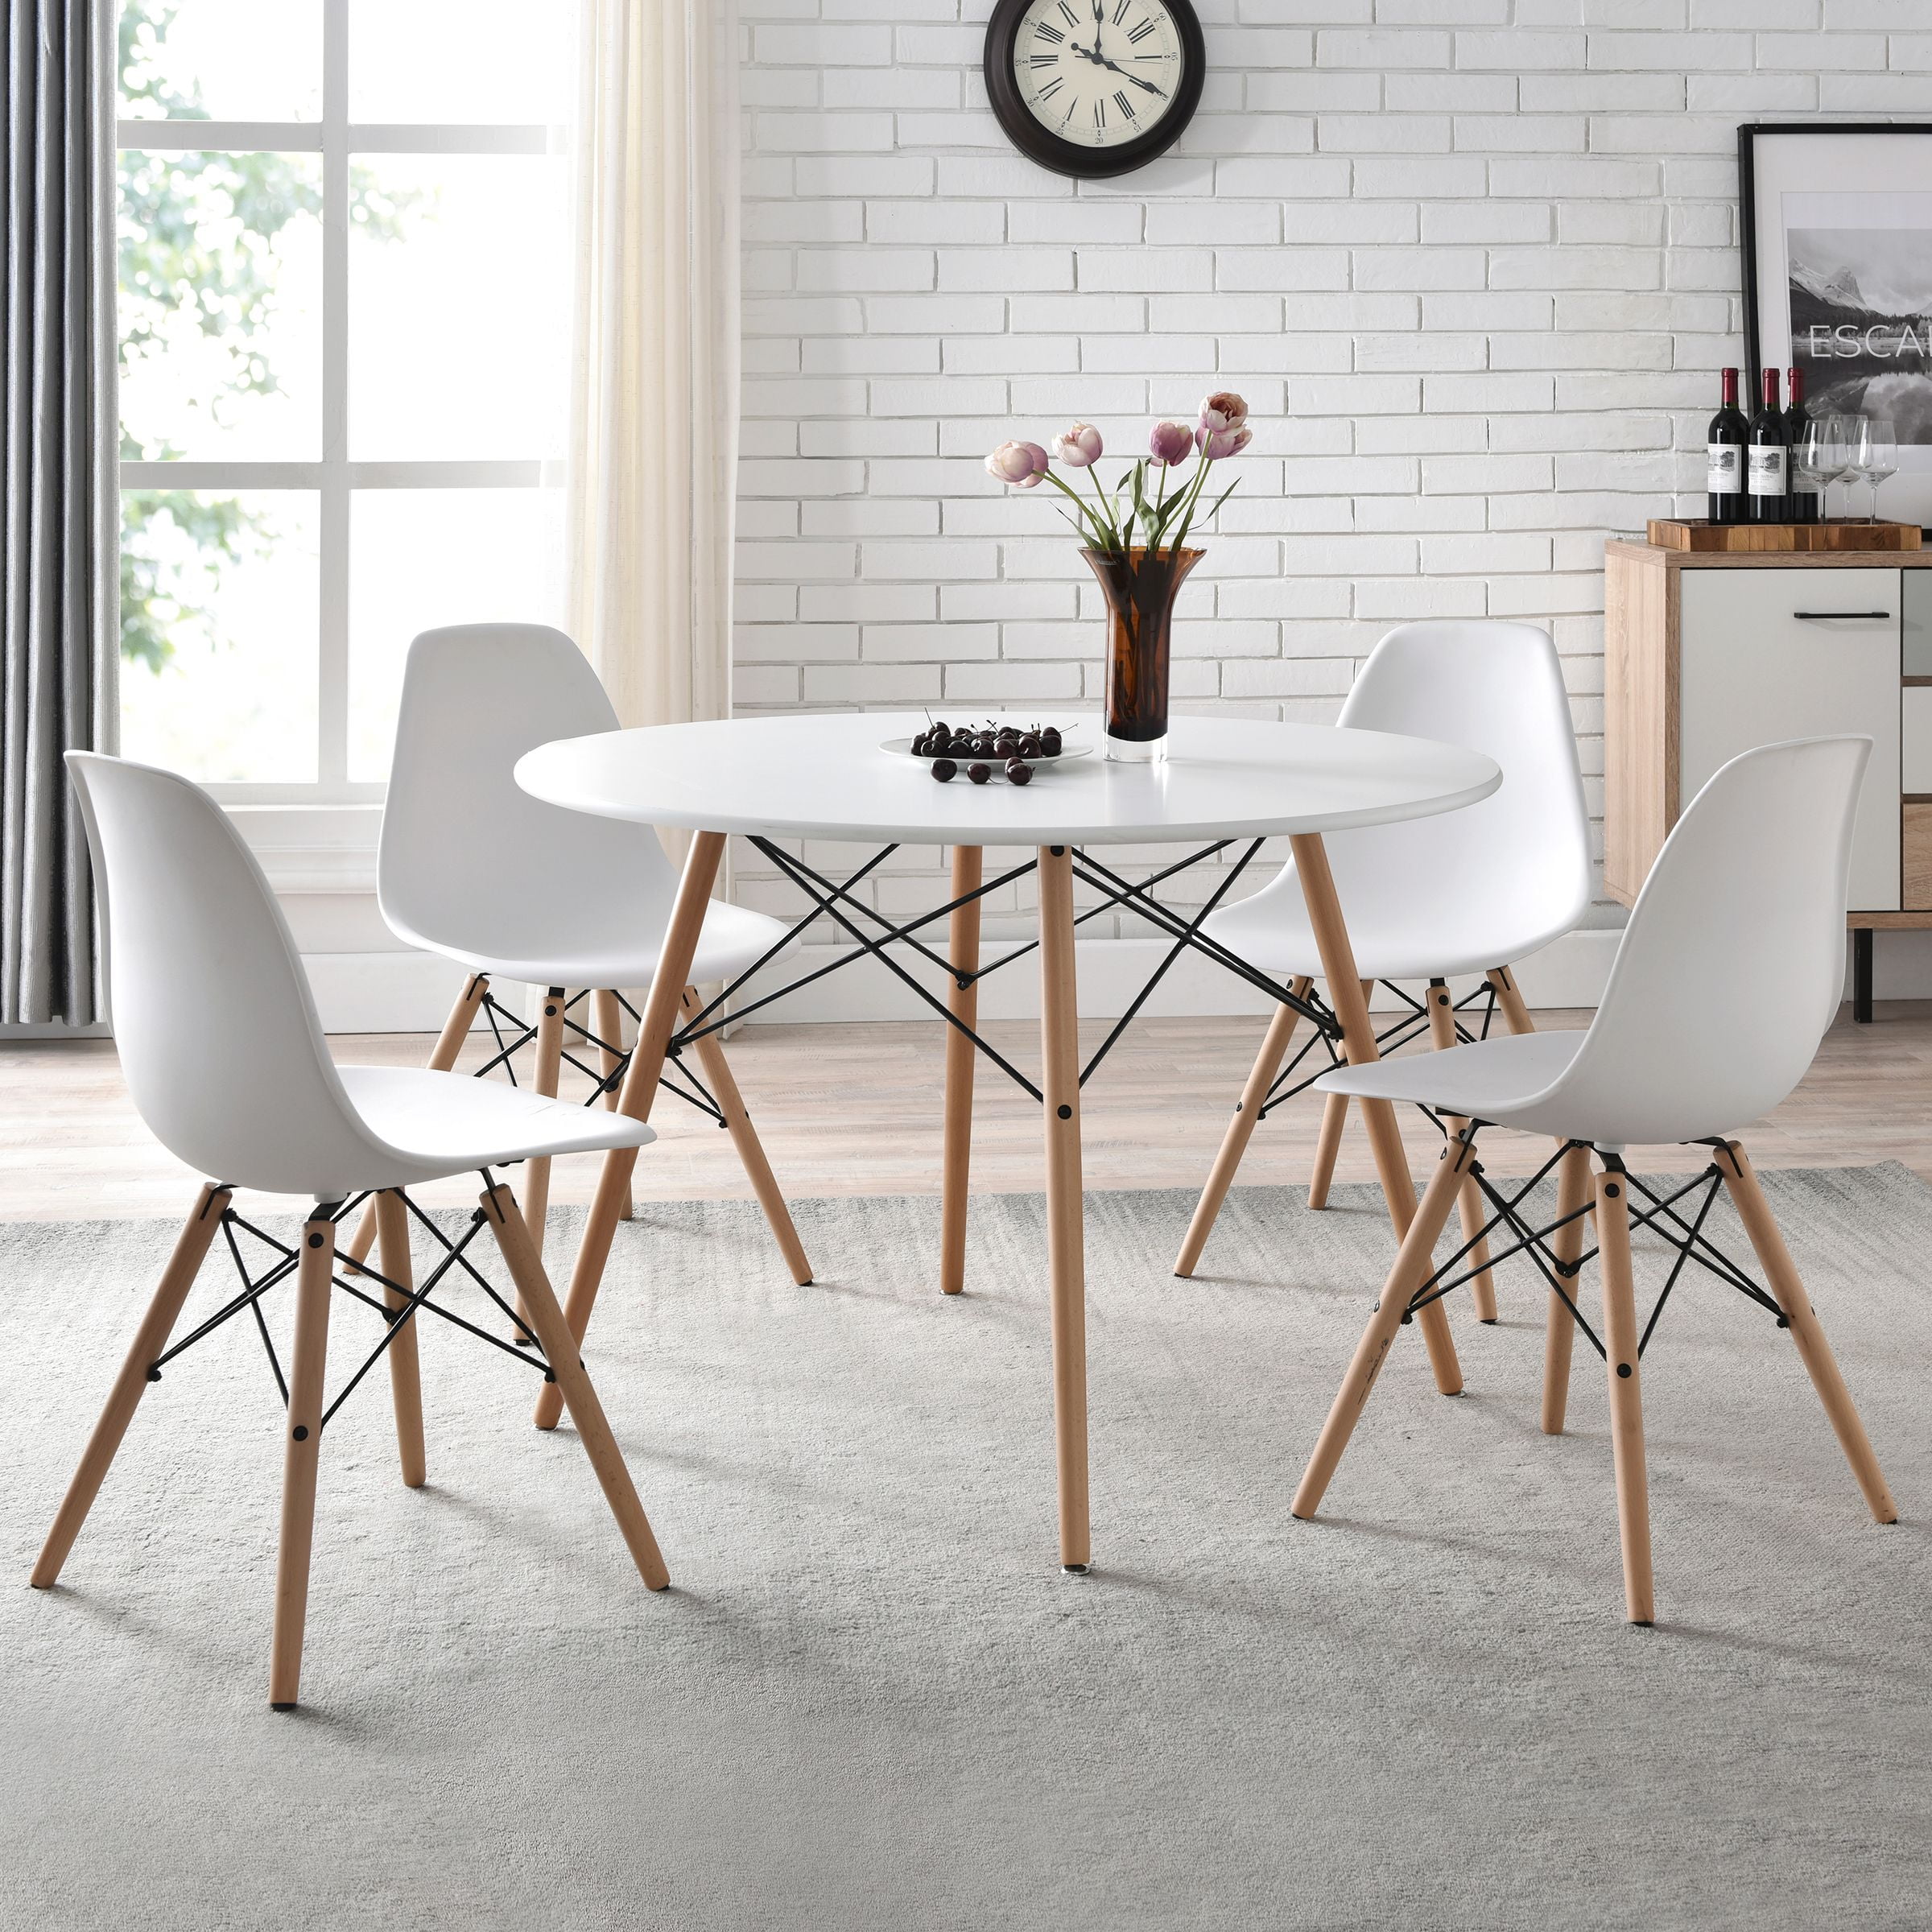 Mainstays Mid Century Modern Dining, Modern Wood Dining Chairs Set Of 4